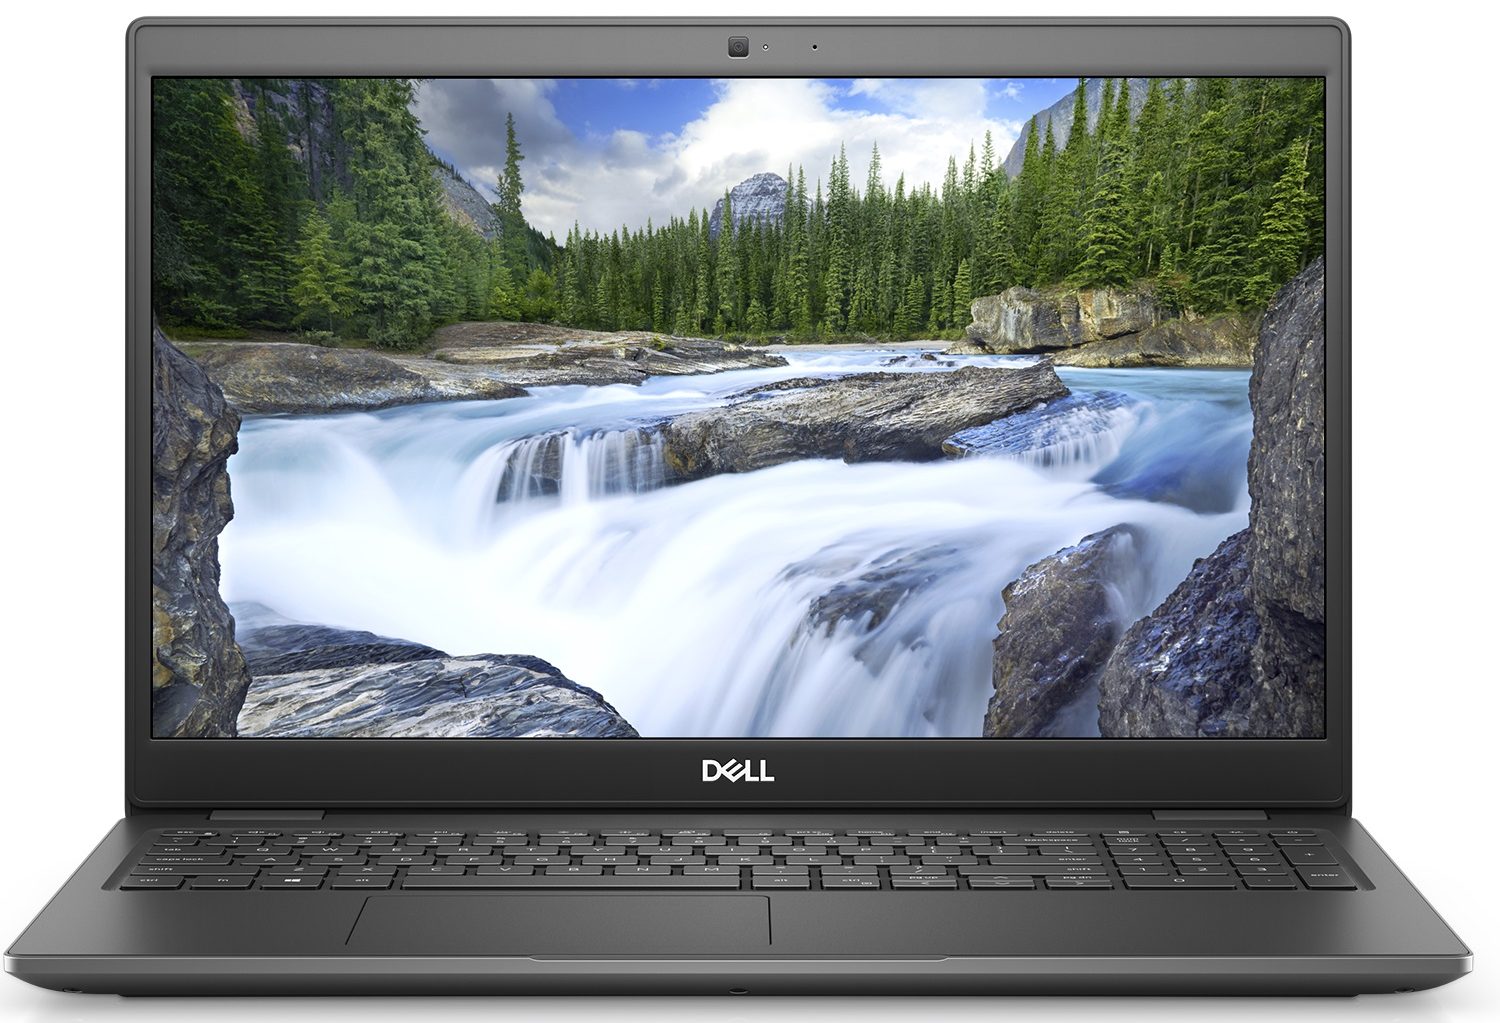 Dell Latitude 15 3510 review - a business notebook dressed in